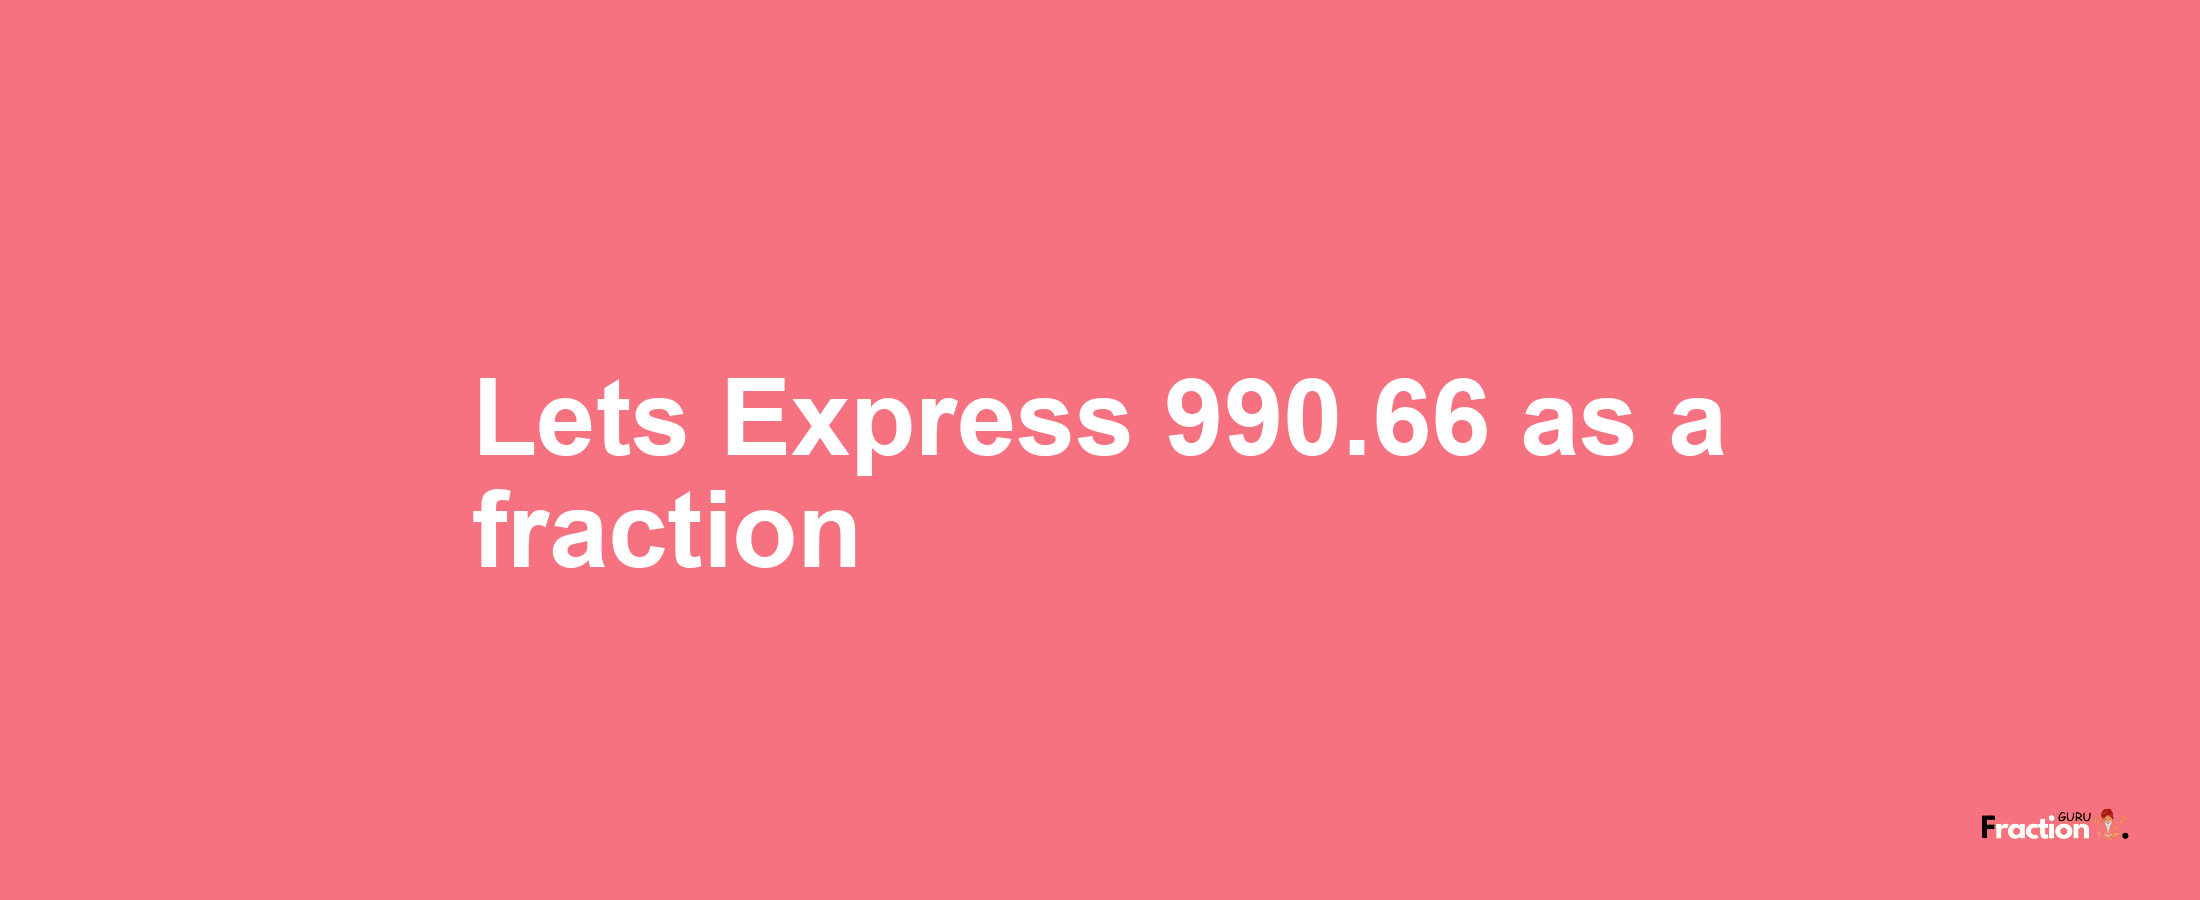 Lets Express 990.66 as afraction